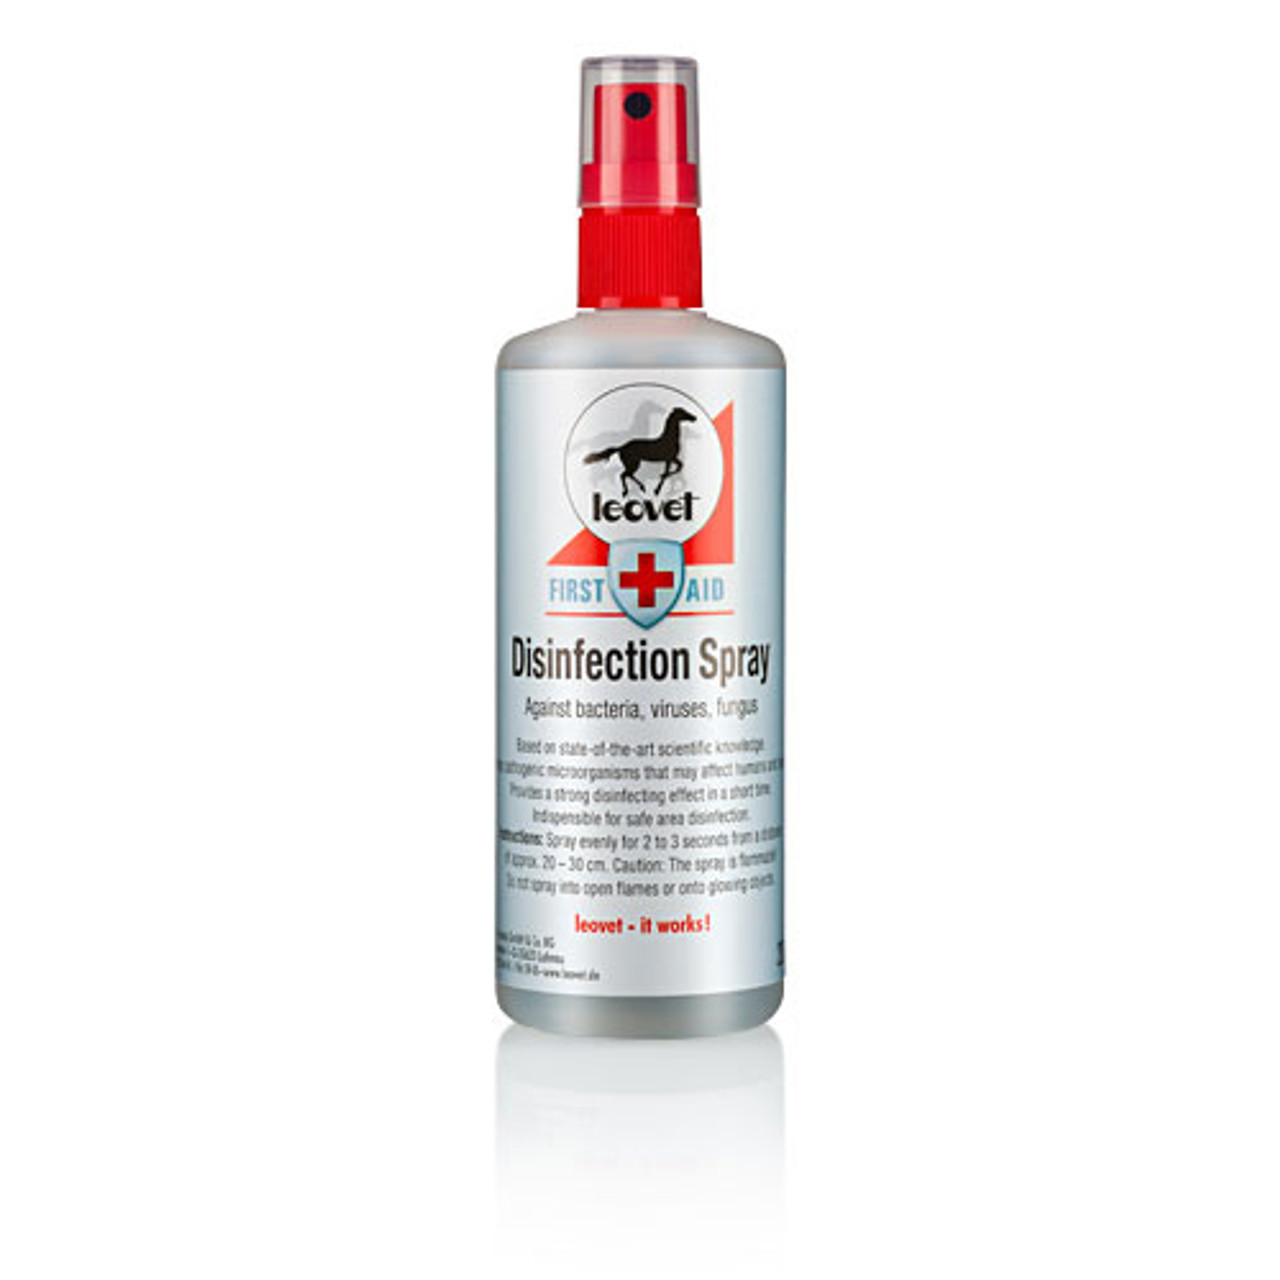 Leovet First Aid Disinfectant Spray: Safe and Effective